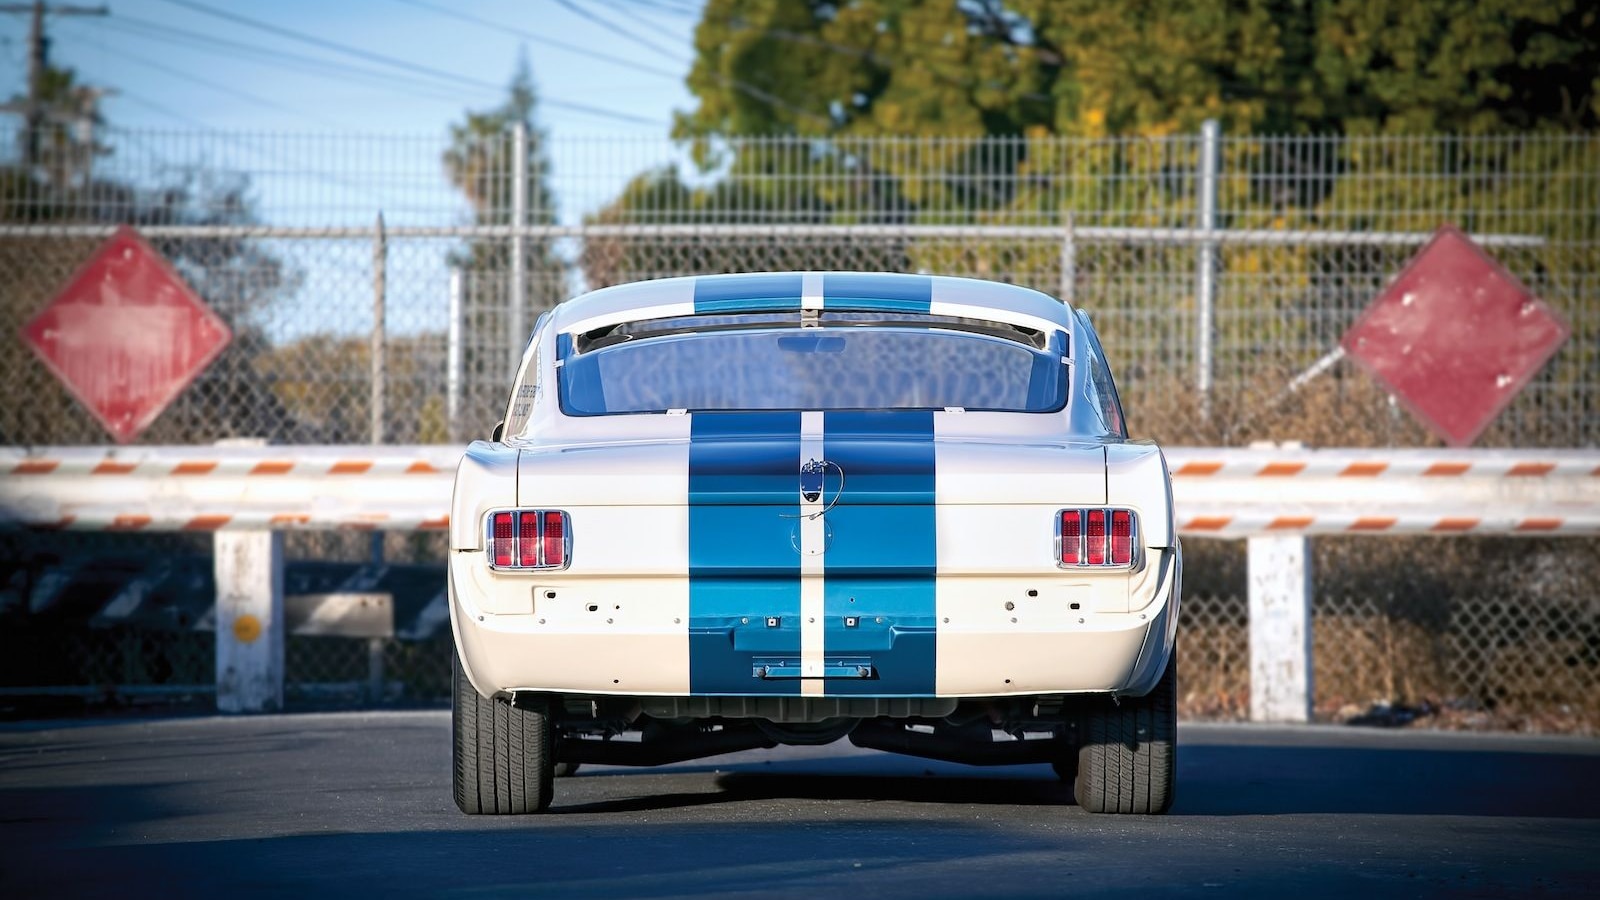 1965 Shelby GT350 R - image: Neil Fraser for RM Auctions